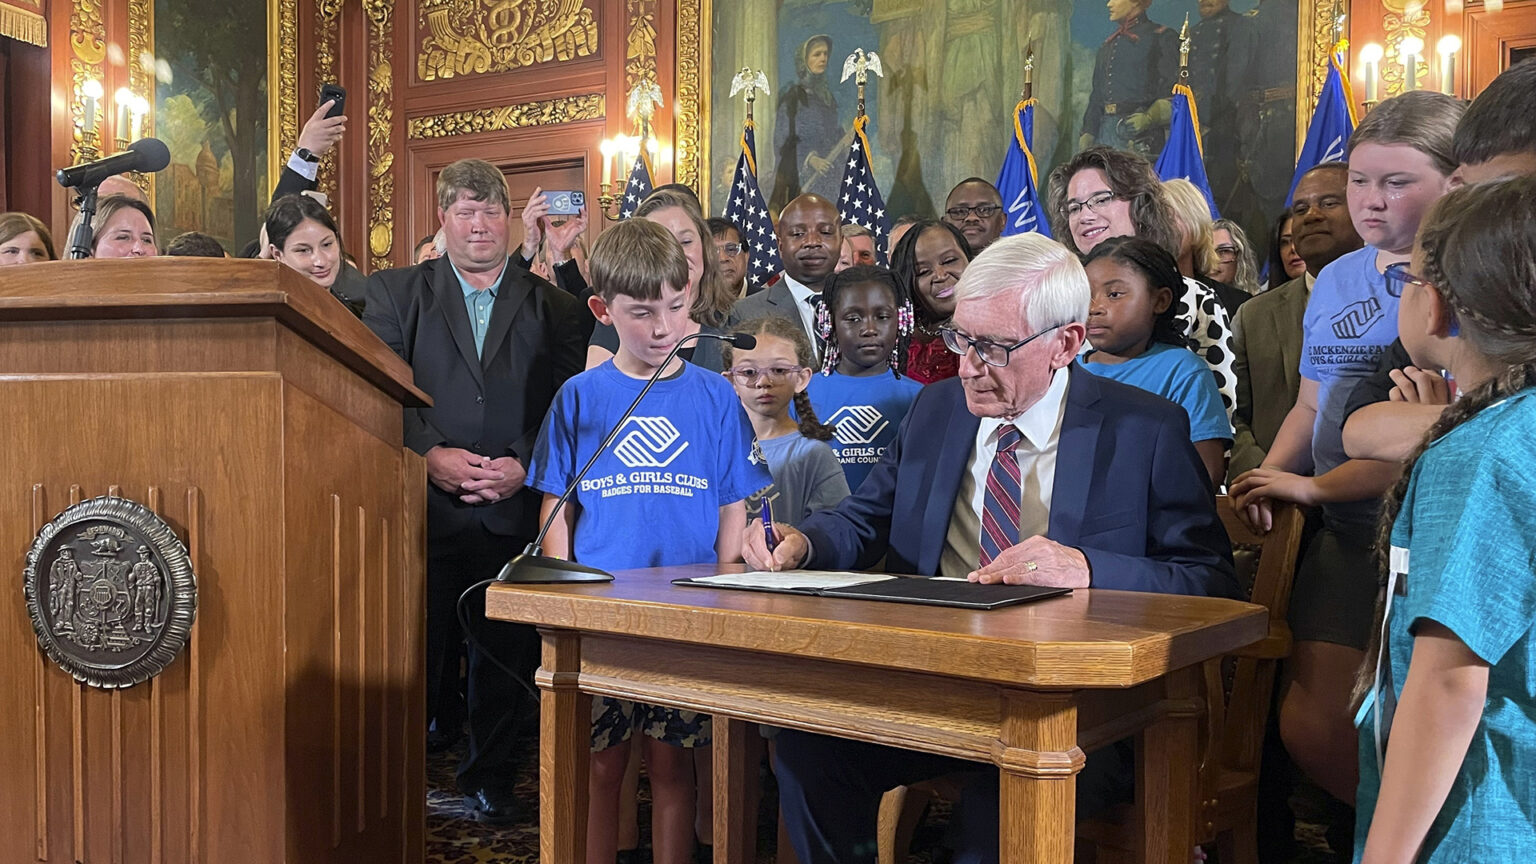 Tony Evers sits at a small wood table placed next to a wood podium affixed with the Great Seal of the State of Wisconsin and uses a pen to sign a document in a folder, with children and adults standing beside and behind him in a room with a row of U.S. and Wisconsin flags, electric wall sconces, paintings, and filigree gilded wall decorations.